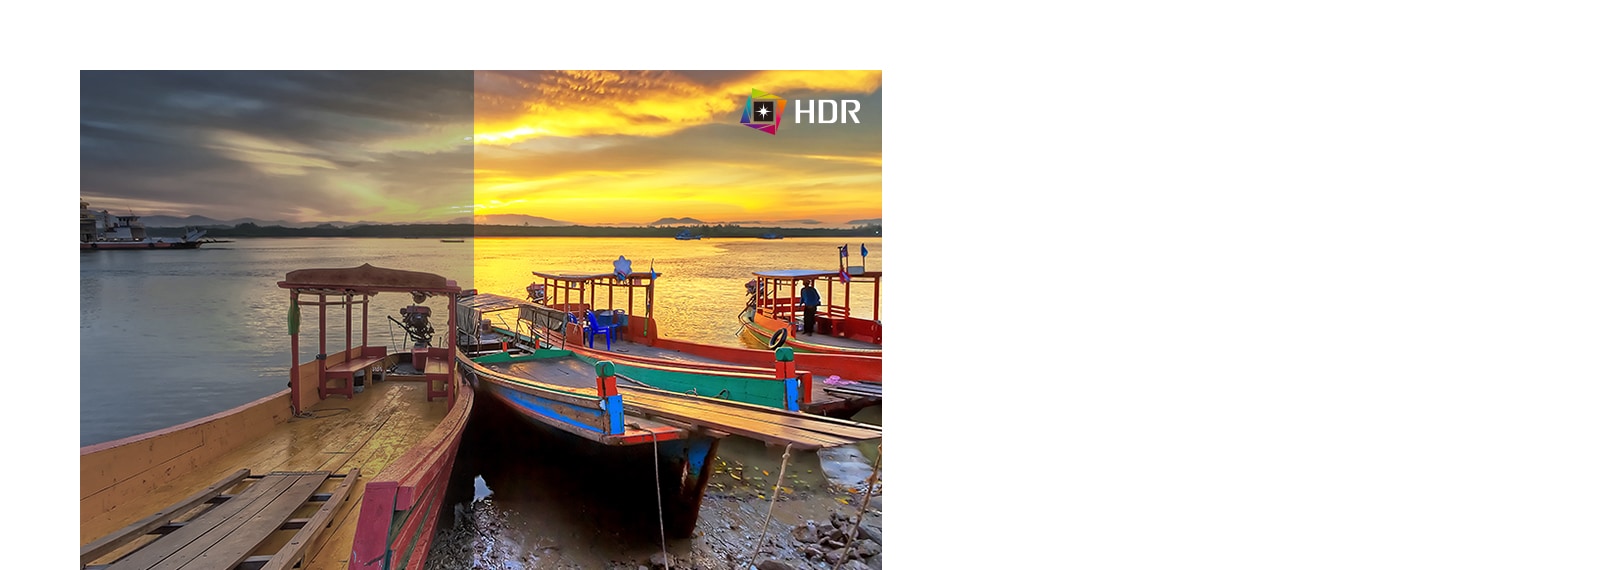 HDR 10: Detailed Contrast